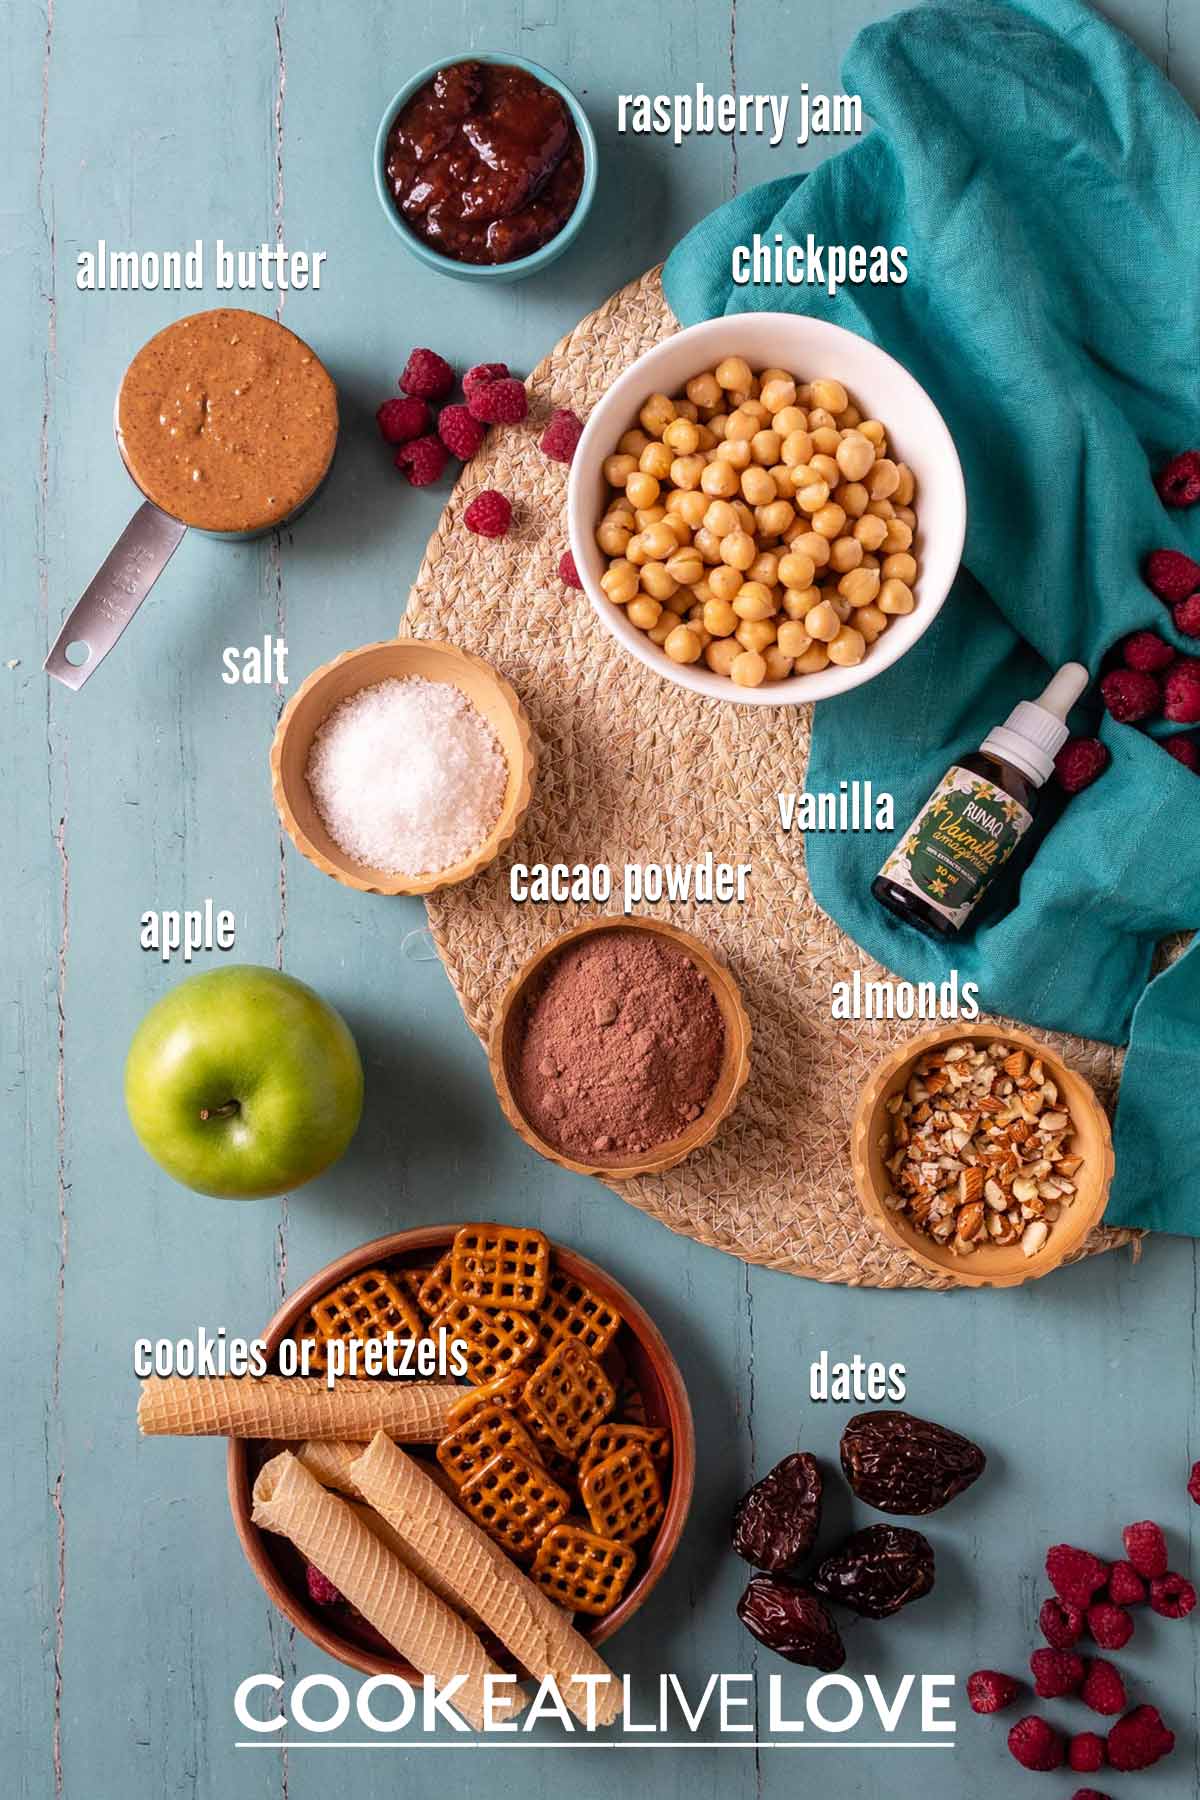 Ingredients to make chocolate hummus on the table.